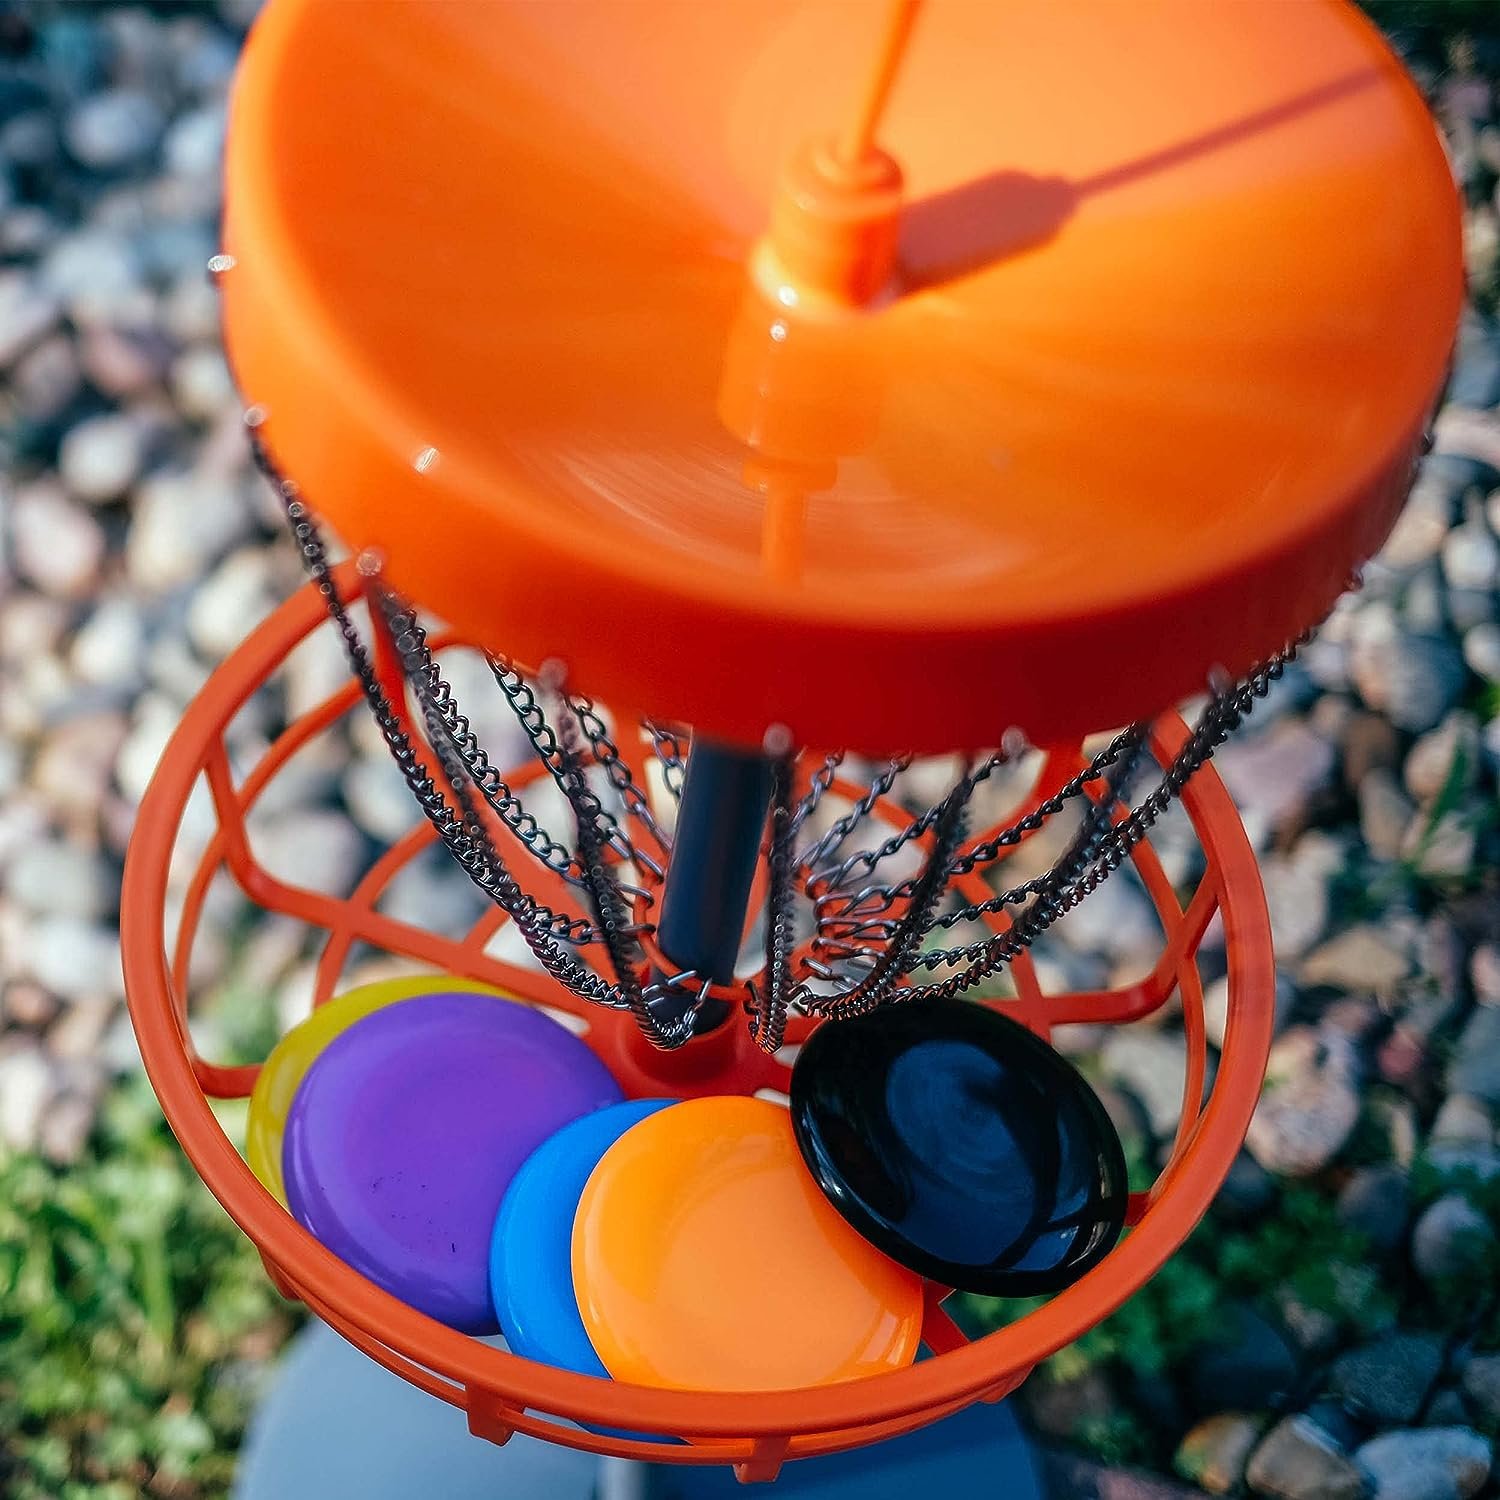 Get Out! Mini Frisbee Golf Set – Mini Disc Golf Basket with Frisbees, Outdoor Toys  Indoor Frisbee Golf Disc Golf Set